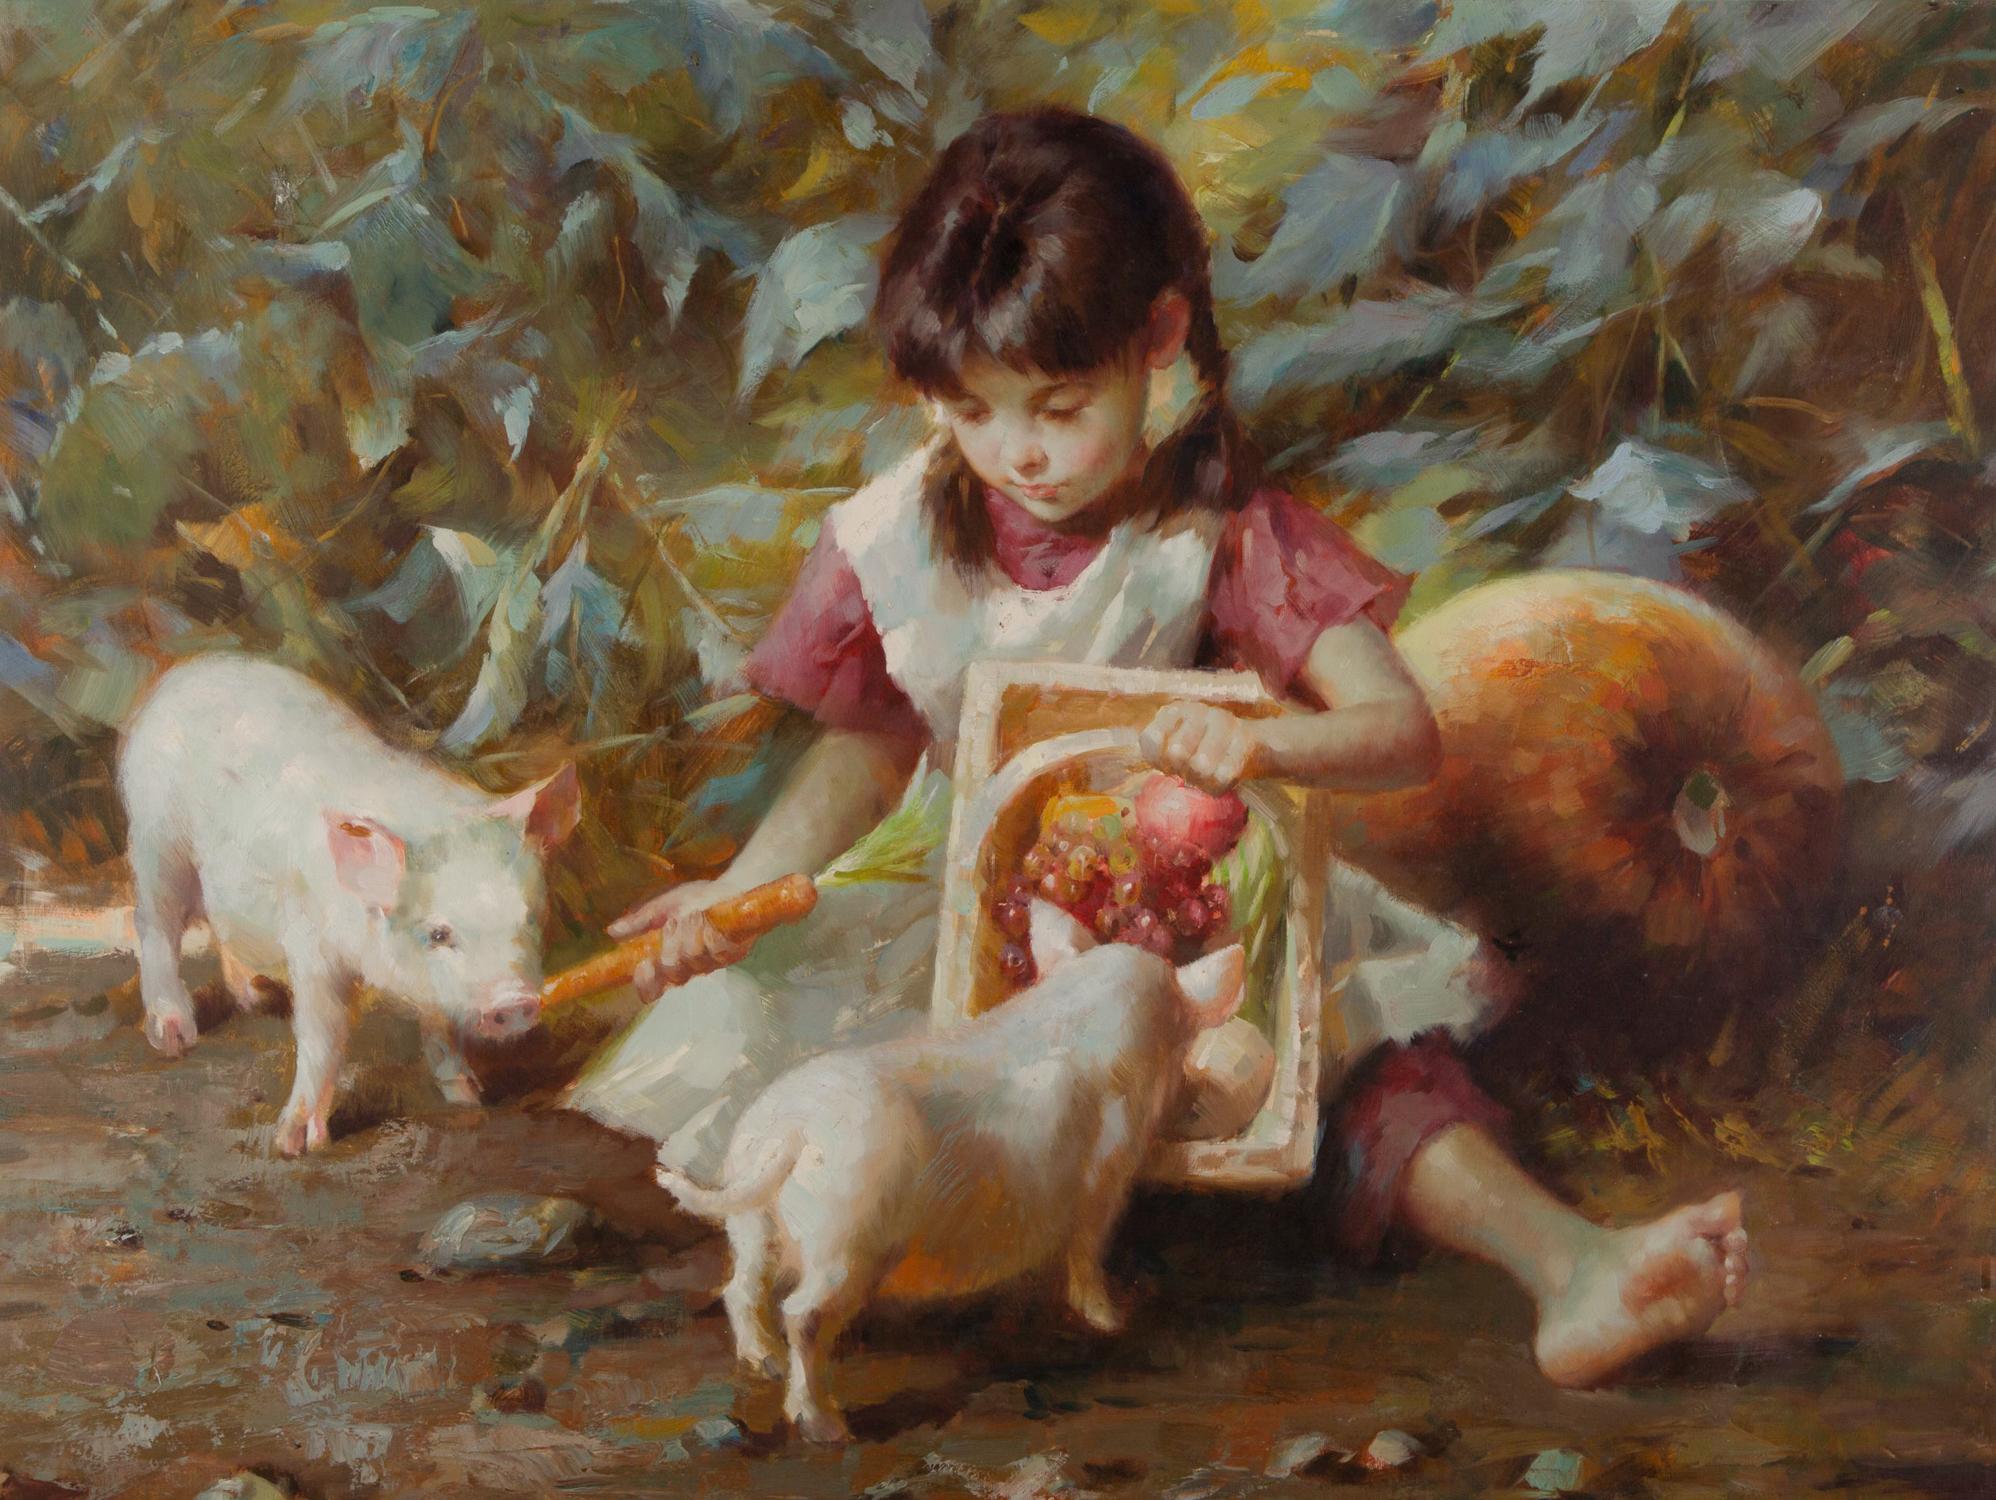  Title: Girl Feed Pig
 Medium: Oil on canvas
 Size: 39.25 x 29.5 inches
 Frame: Framing options available!
 Condition: The painting is laid on the matt board and appears to be in excellent condition.
 
 Year: 2000 Circa
 Artist: Wang Yan
 Signature: